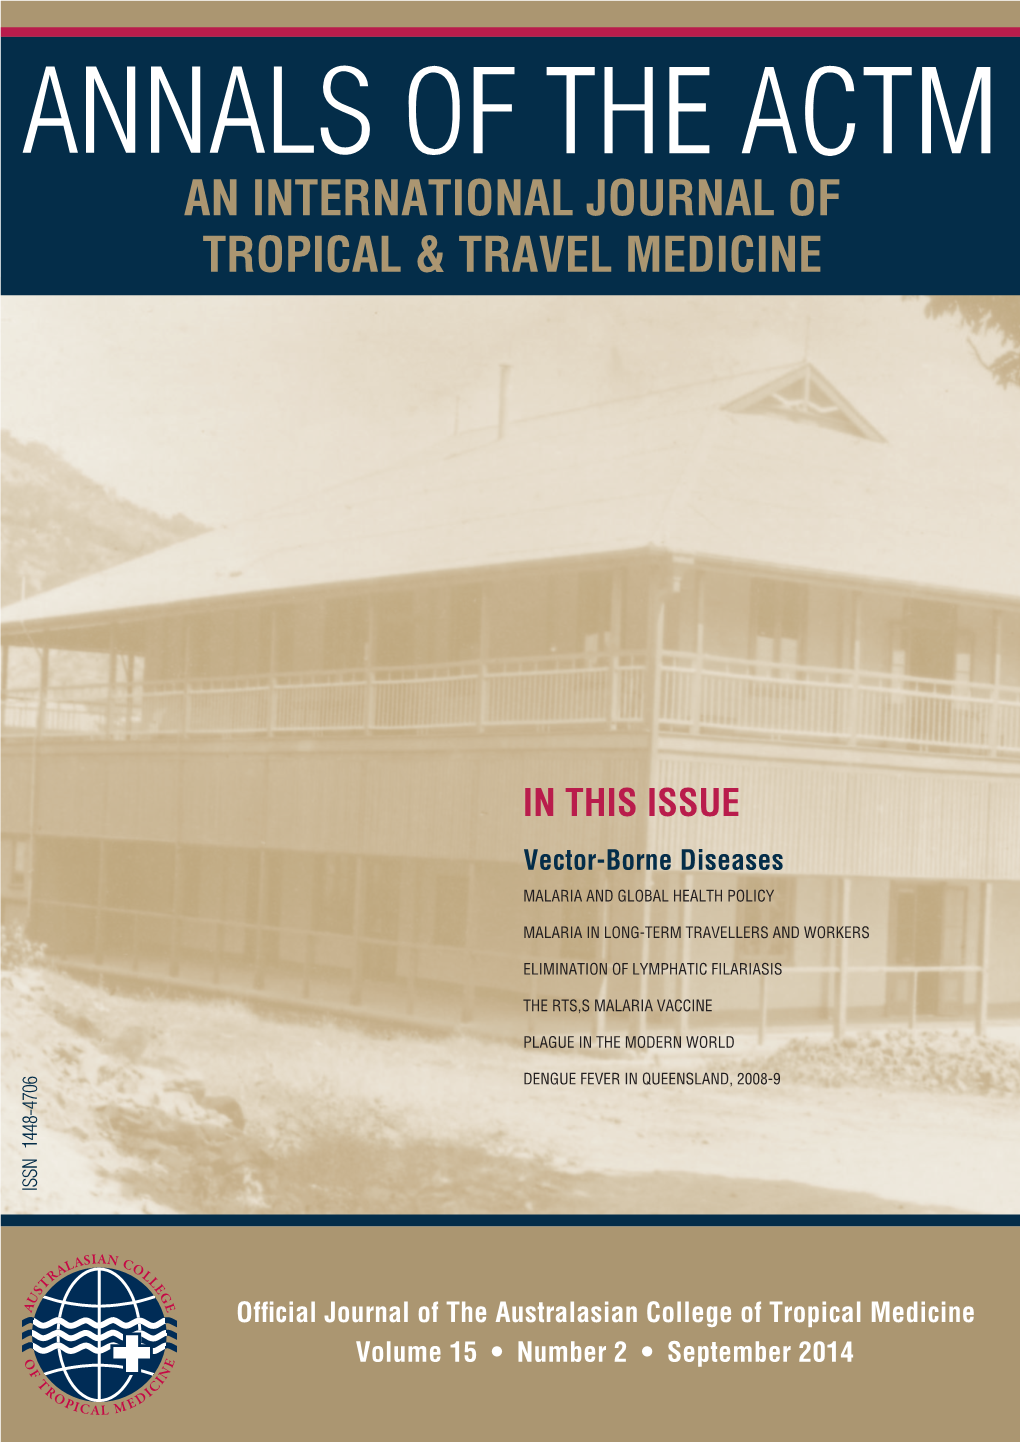 Annals of the Australasian College of Tropical Medicine September 2014